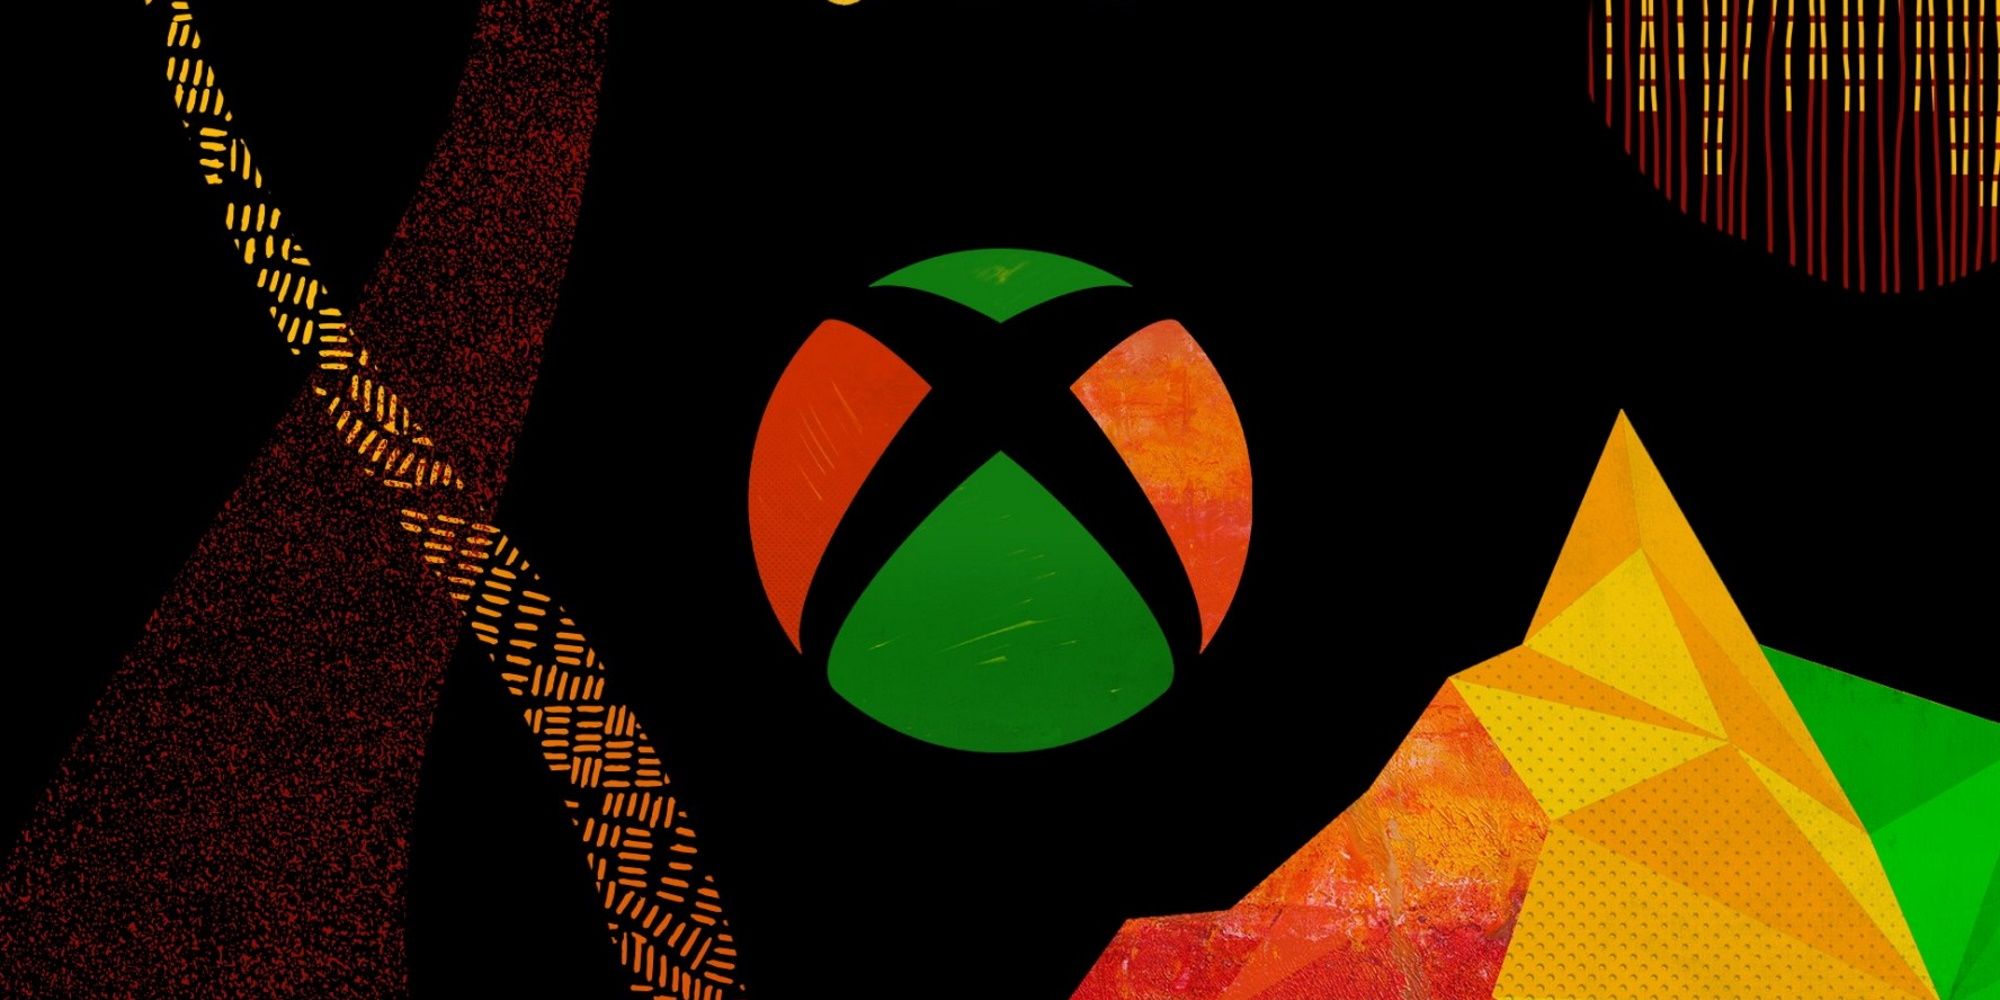 Xbox Marks Black History Month By Celebrating Black Game Designers And Content Creators